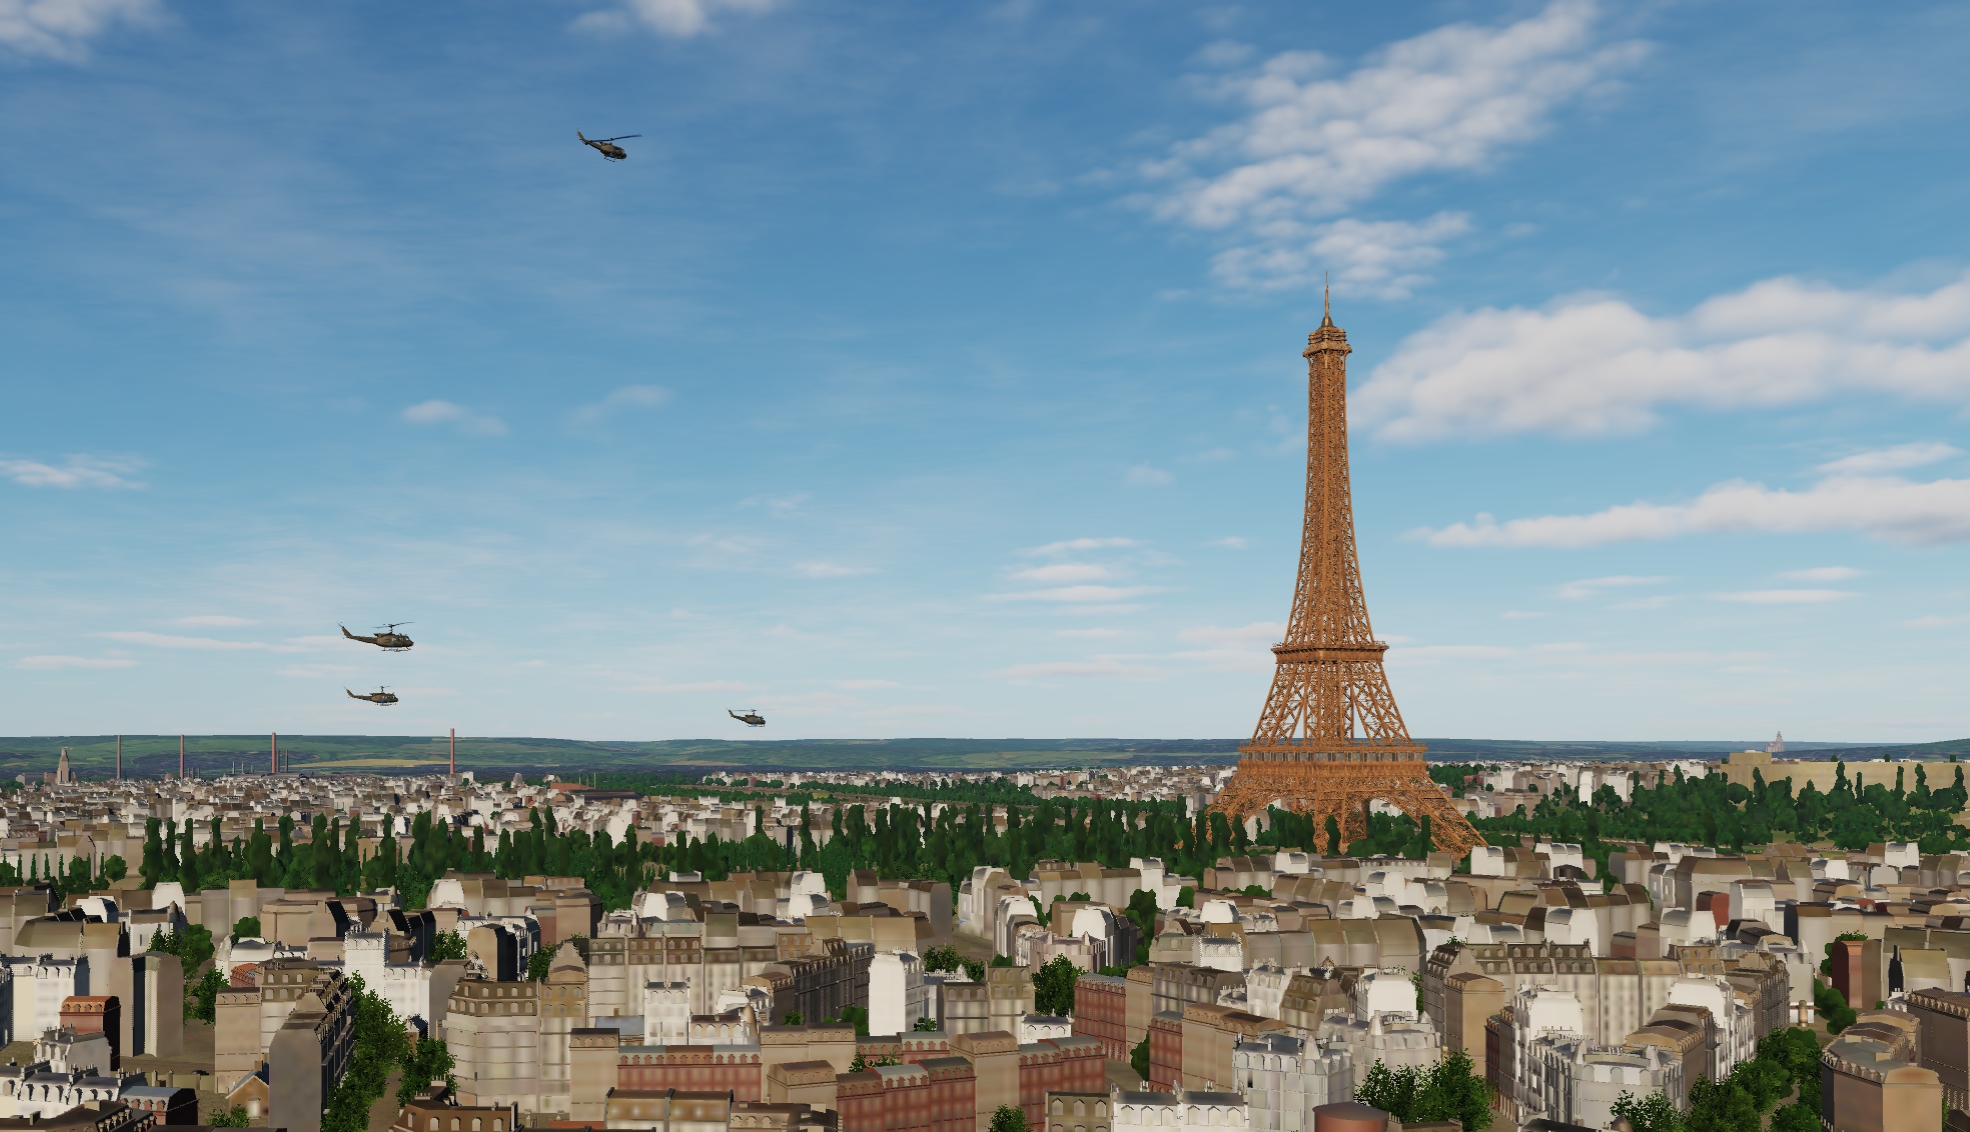 Paris Air Race for Huey's (UPDATED Version Fixed Embarkation at Notra Dame ... I hope))